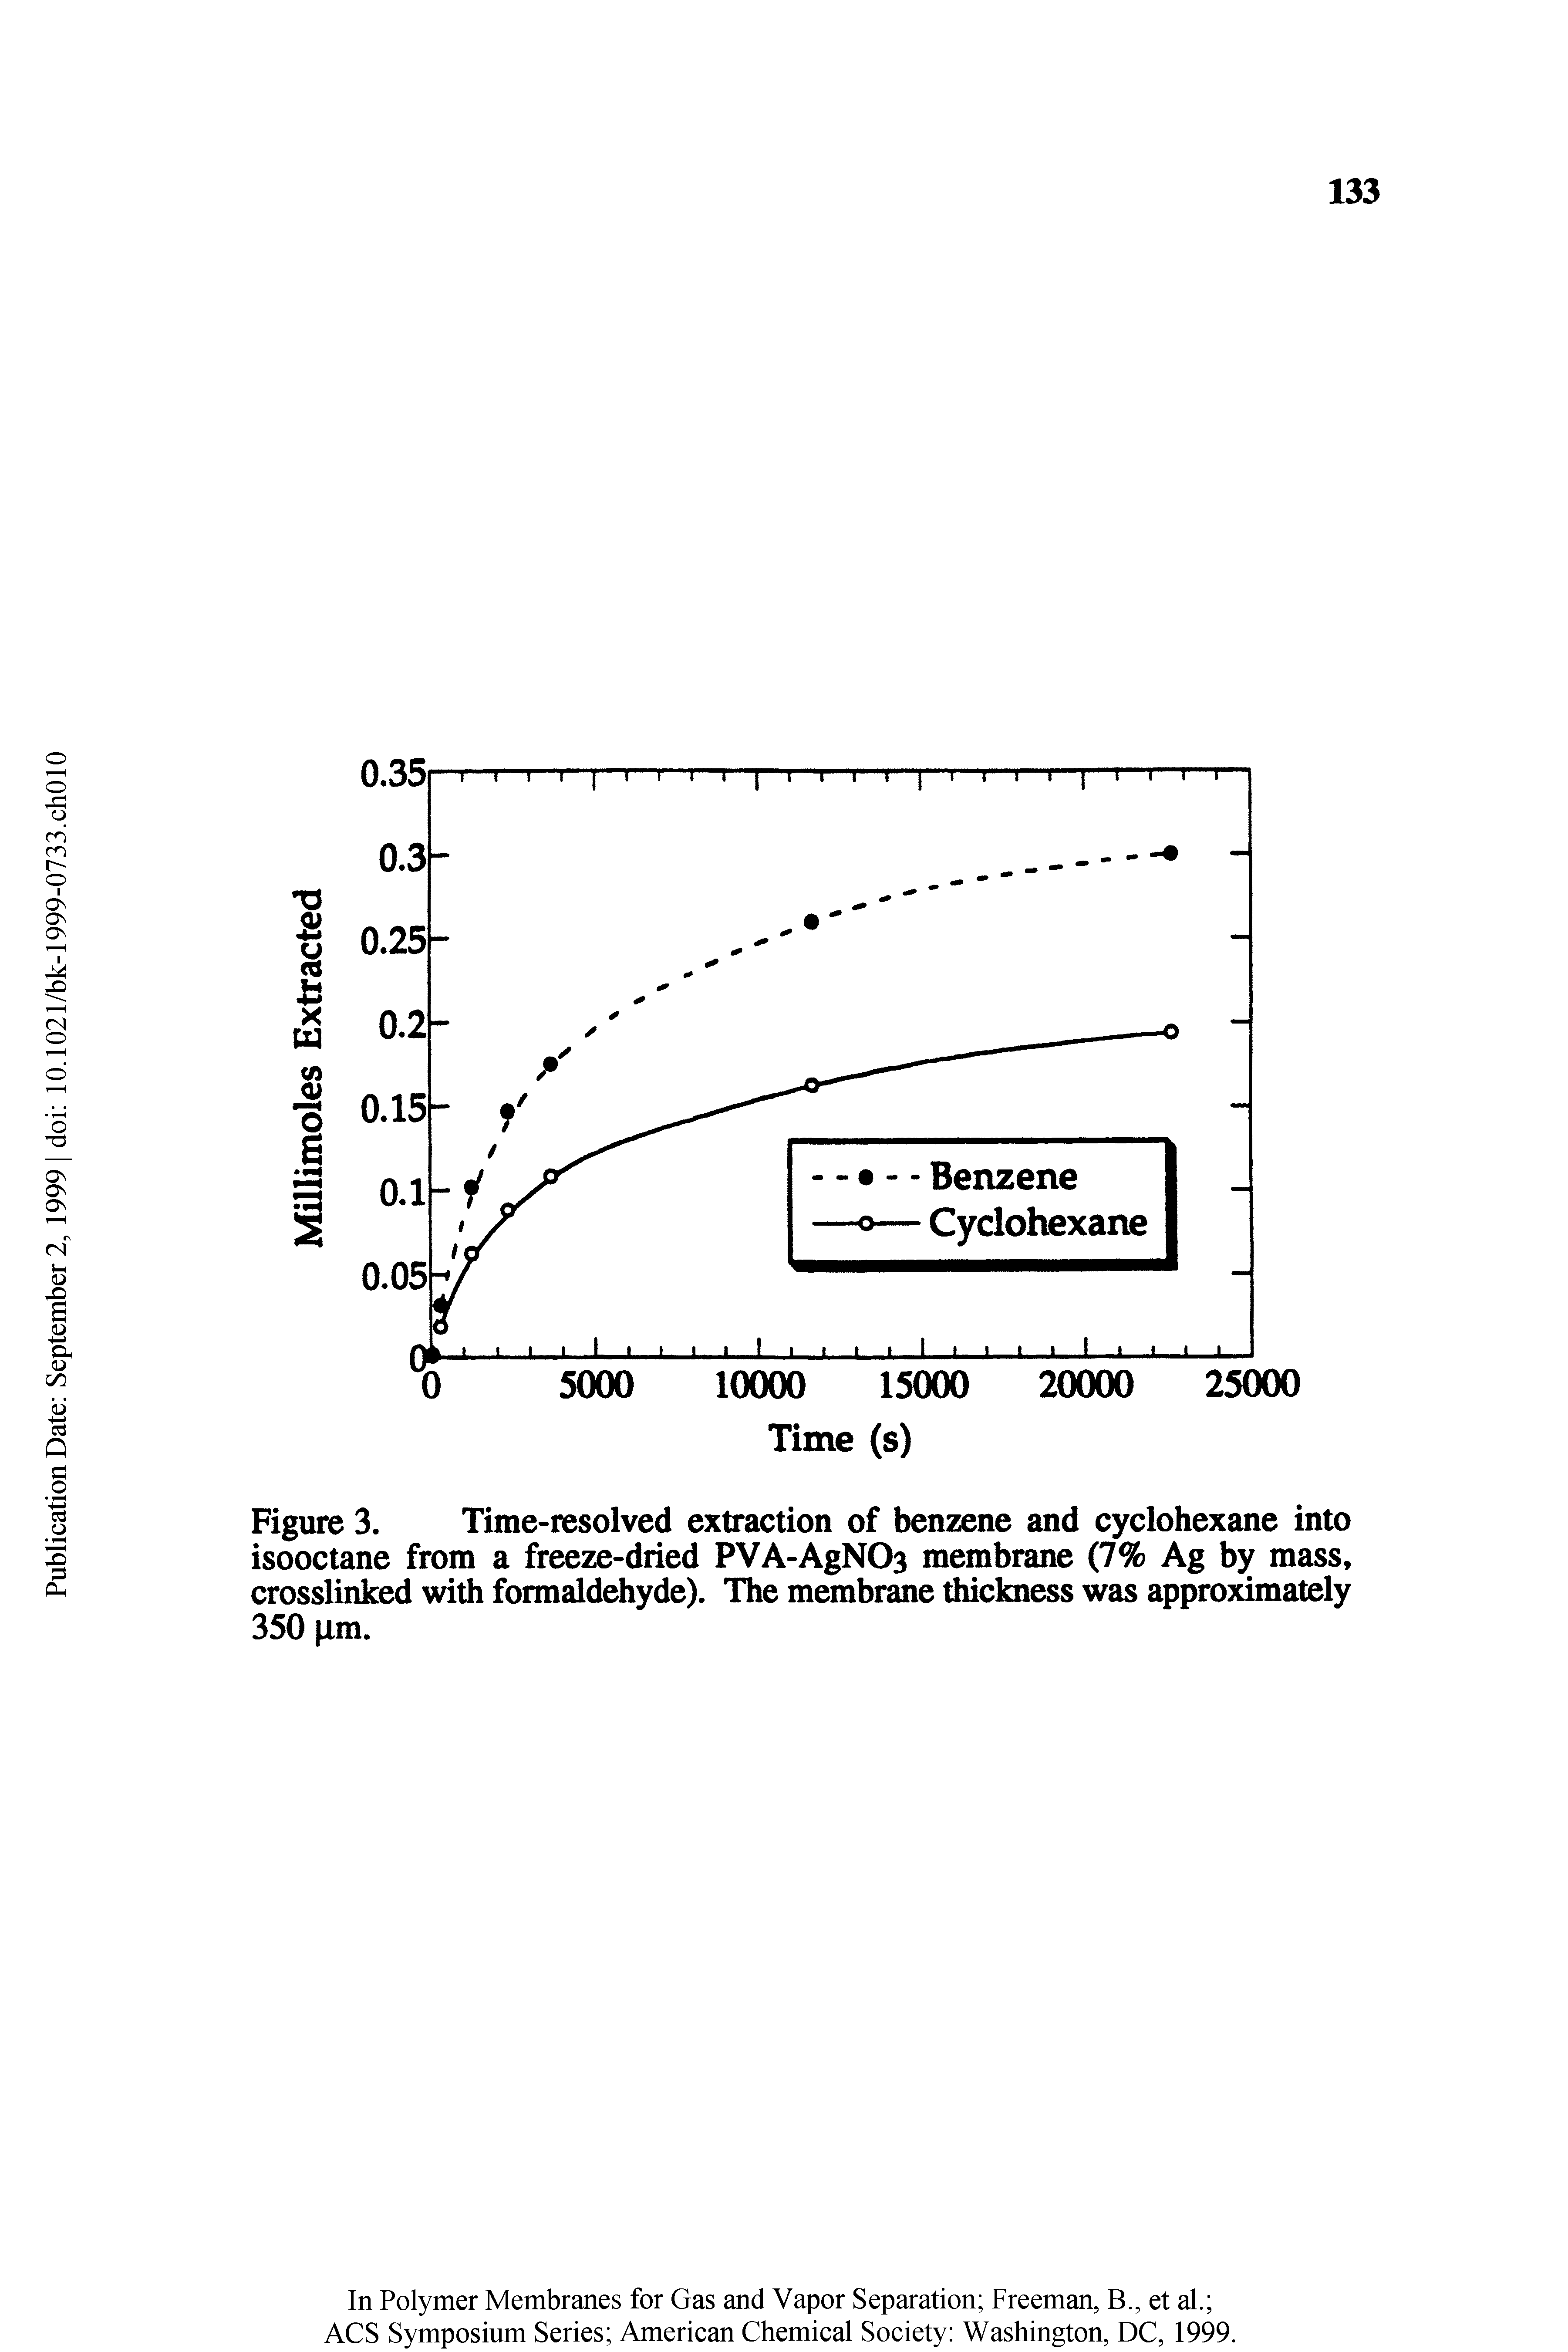 Figure 3. Time-resolved extraction of benzene and cyclohexane into isooctane from a freeze-dried PVA-AgNOs membrane (7% Ag by mass, crosslinked with formaldehyde). The membrane thickness was approximately 350 fim.